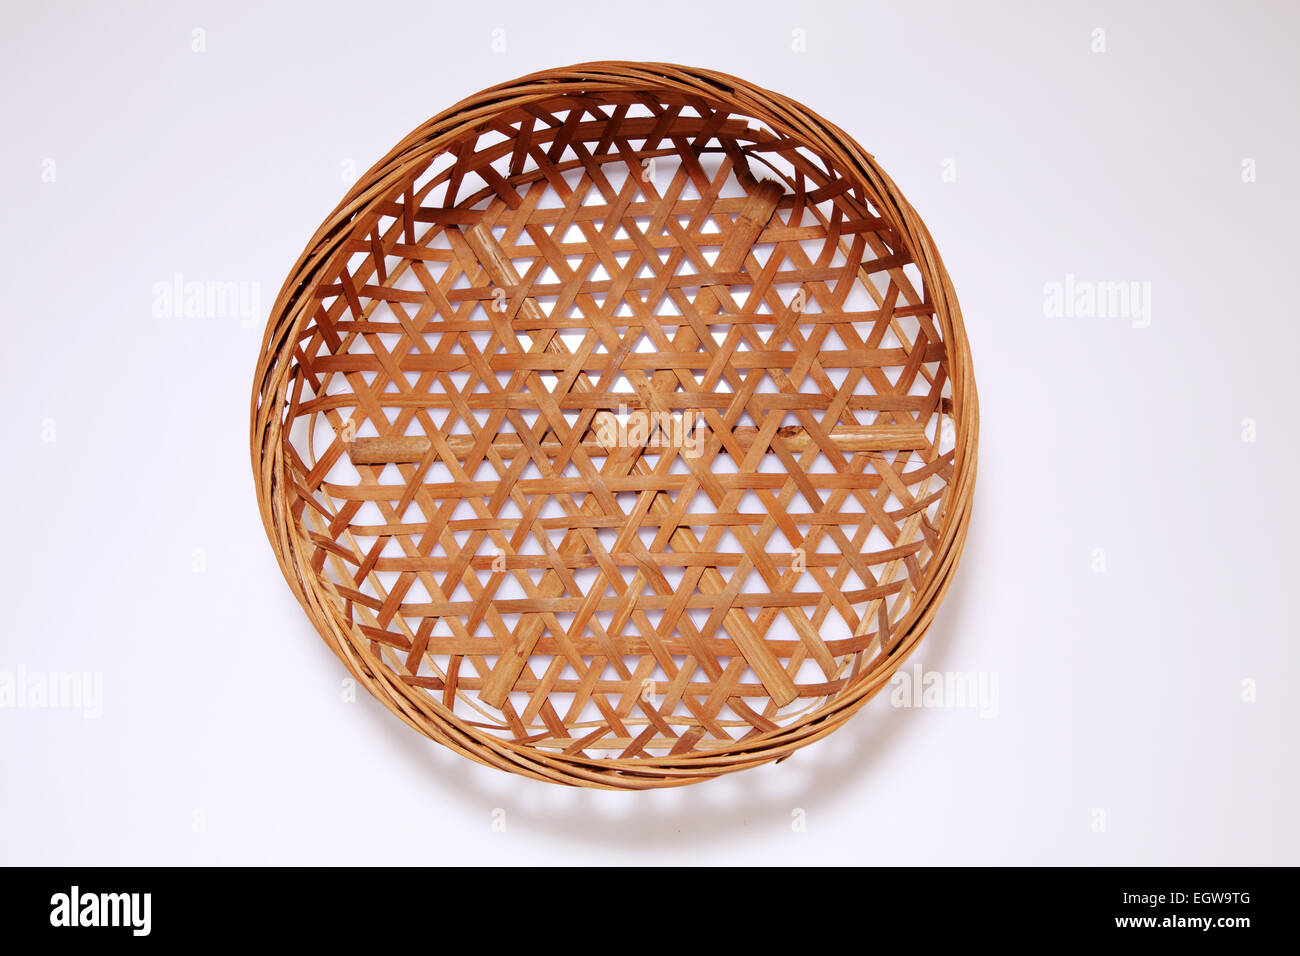 top view of the round shape basket Stock Photo